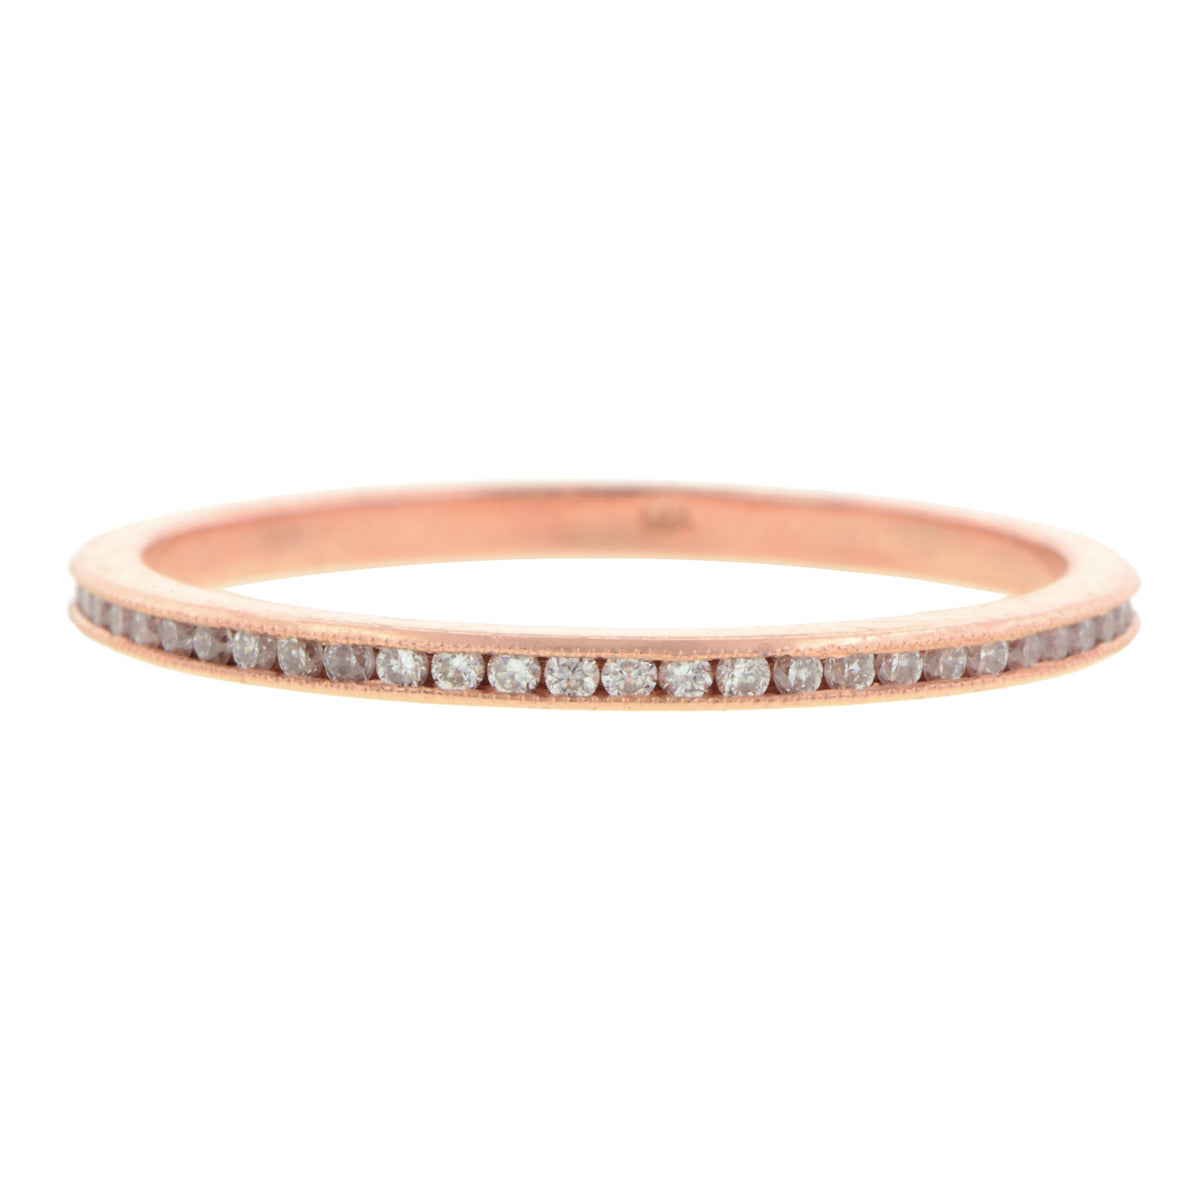 Contemporary ring: a Rose Gold Diamond Eternity Band, 0.25ctw. sold by Doyle & Doyle vintage and antique jewelry boutique.